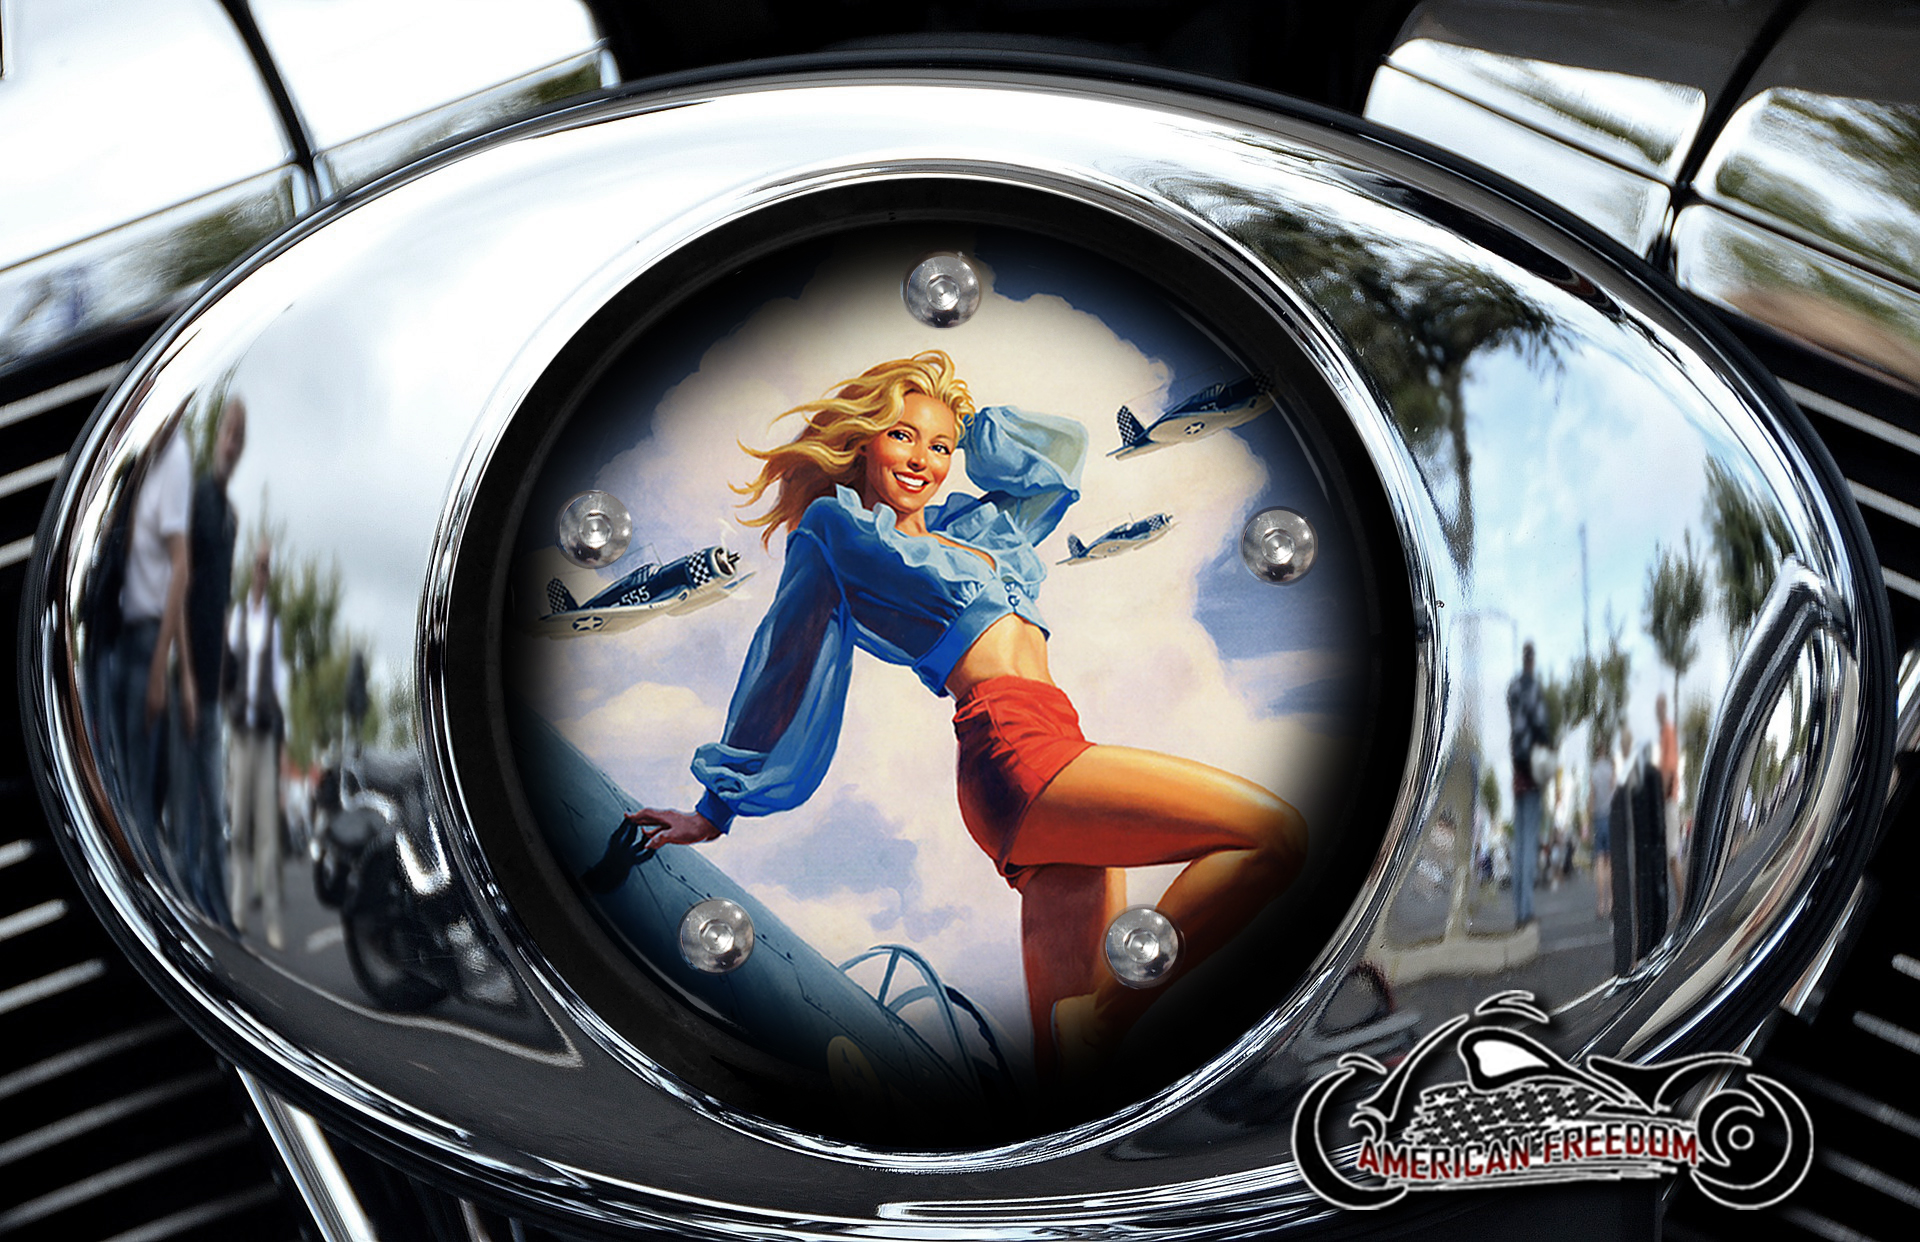 Custom Air Cleaner Cover - Red Shorts Pin Up